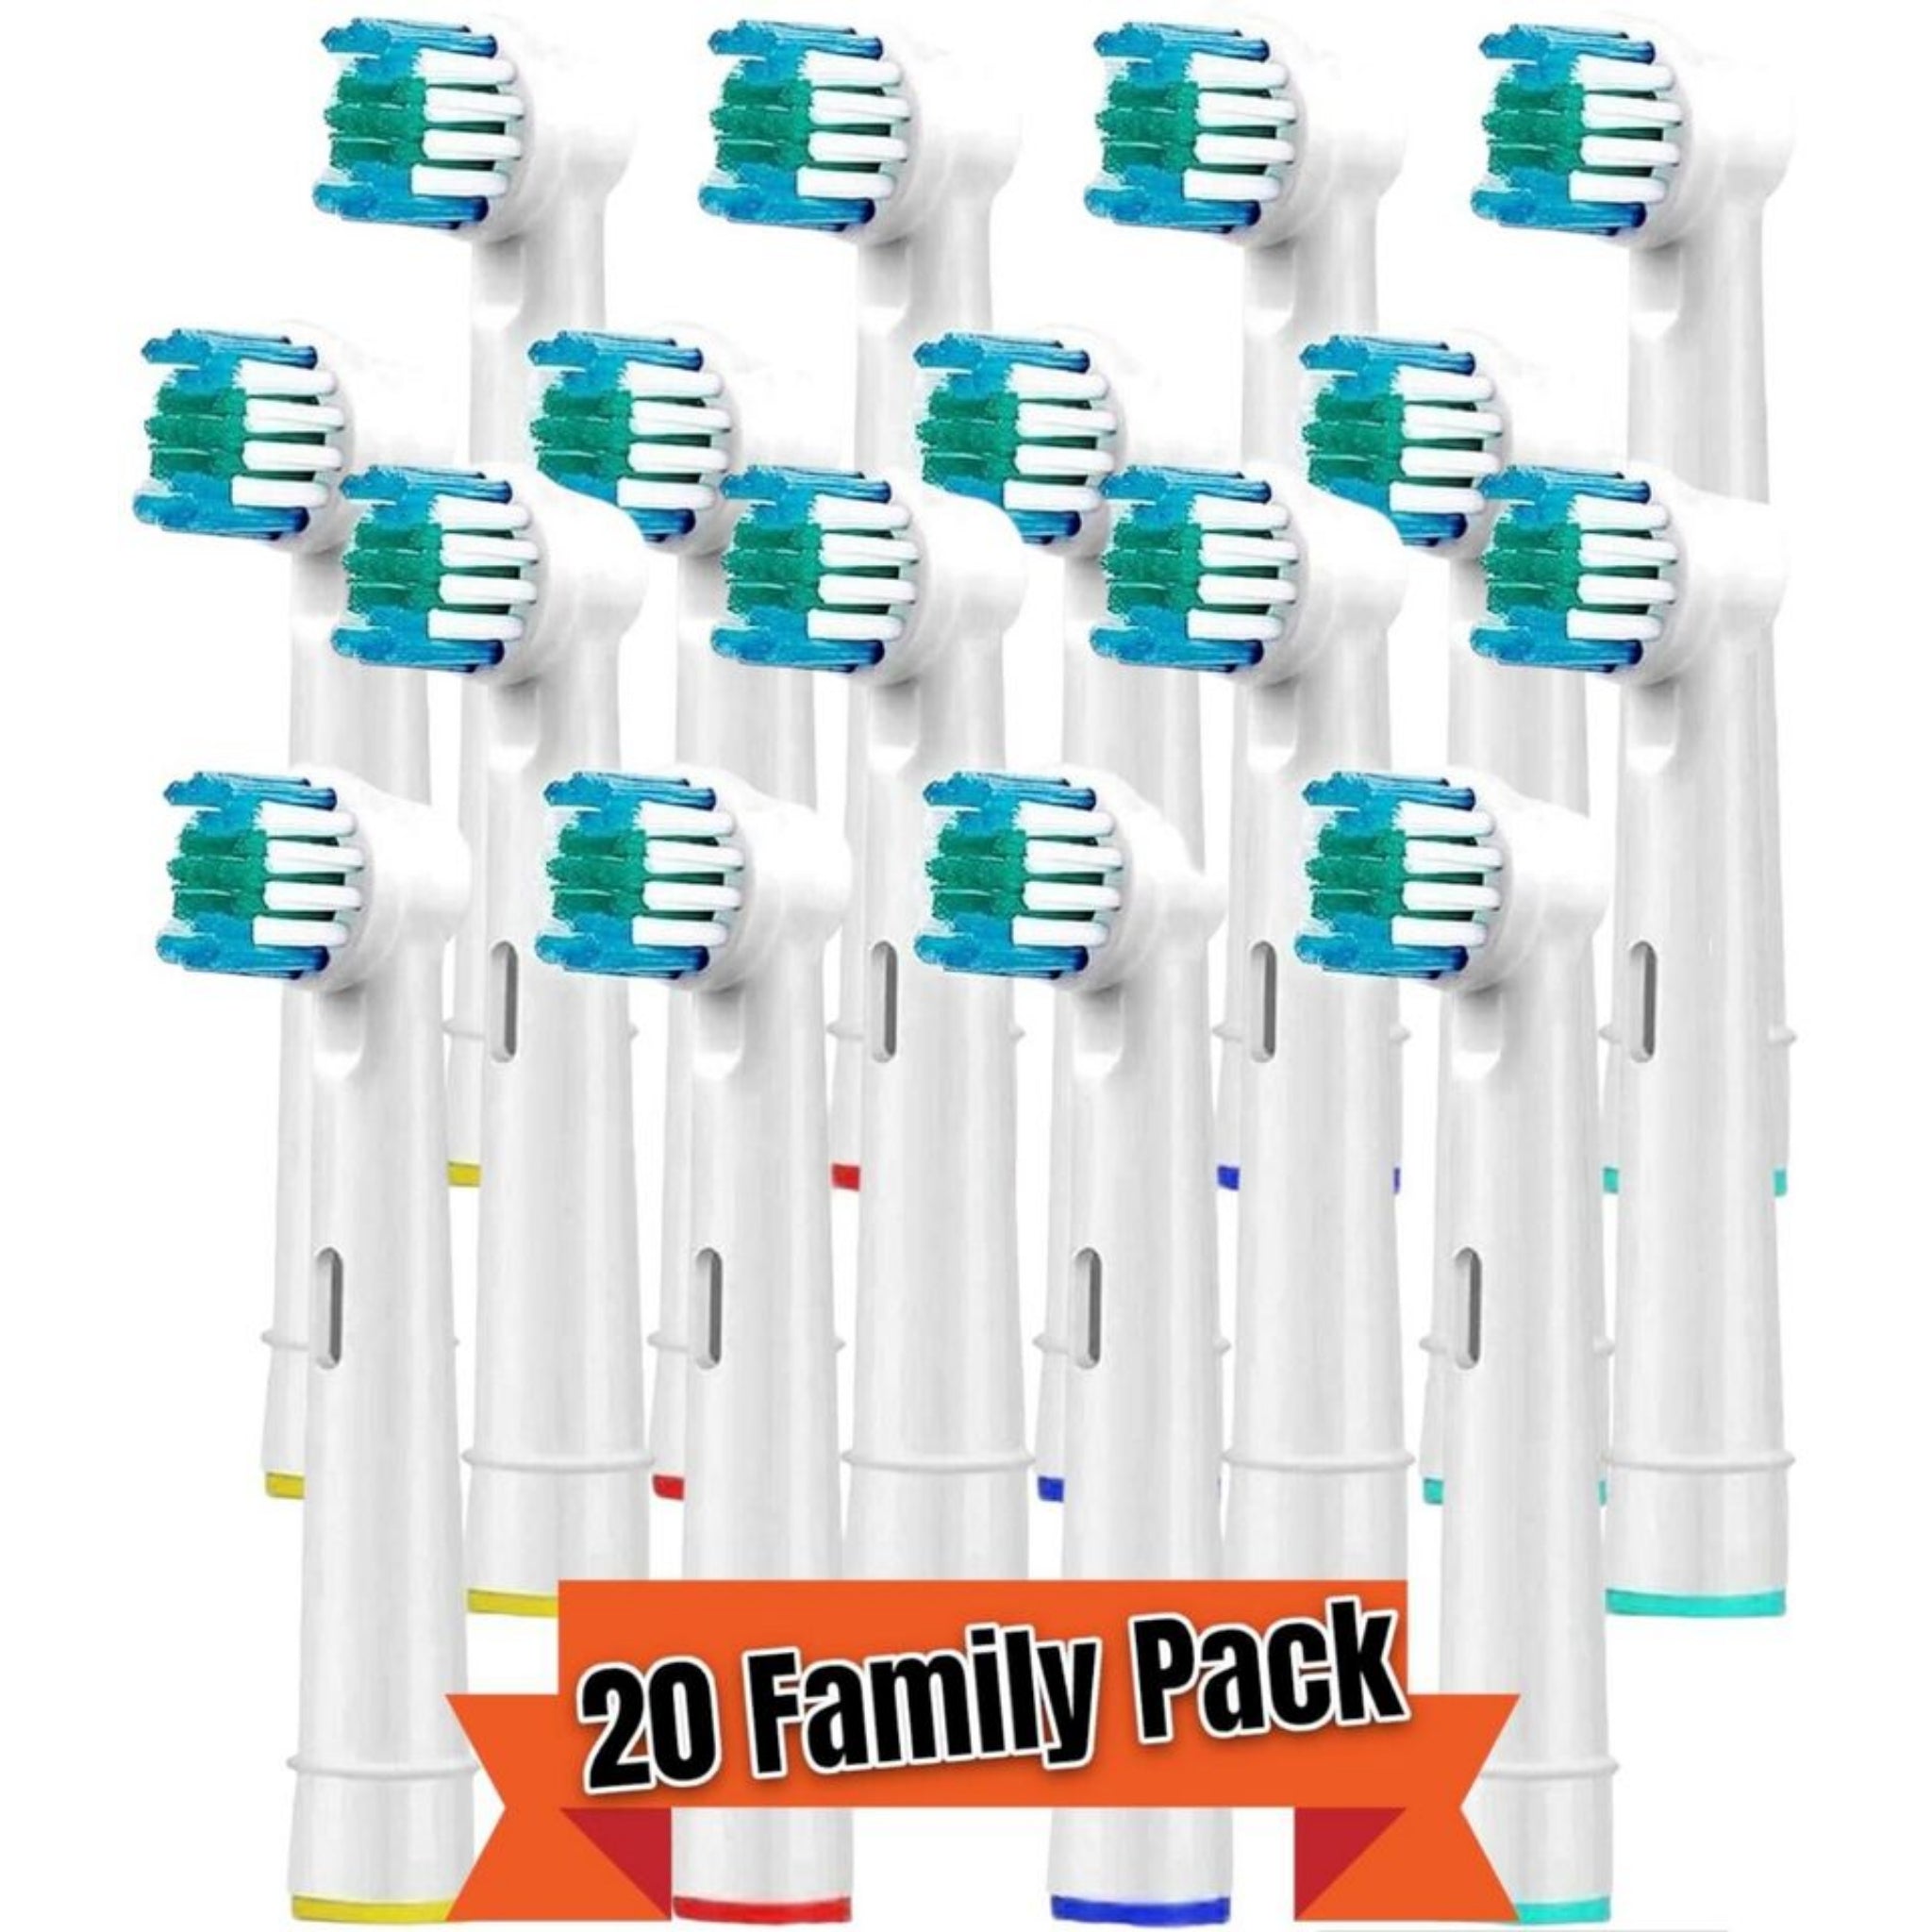 Beclen Harp 20 Electric Toothbrush Heads Compatible With Oral B Braun Replacement brush Head